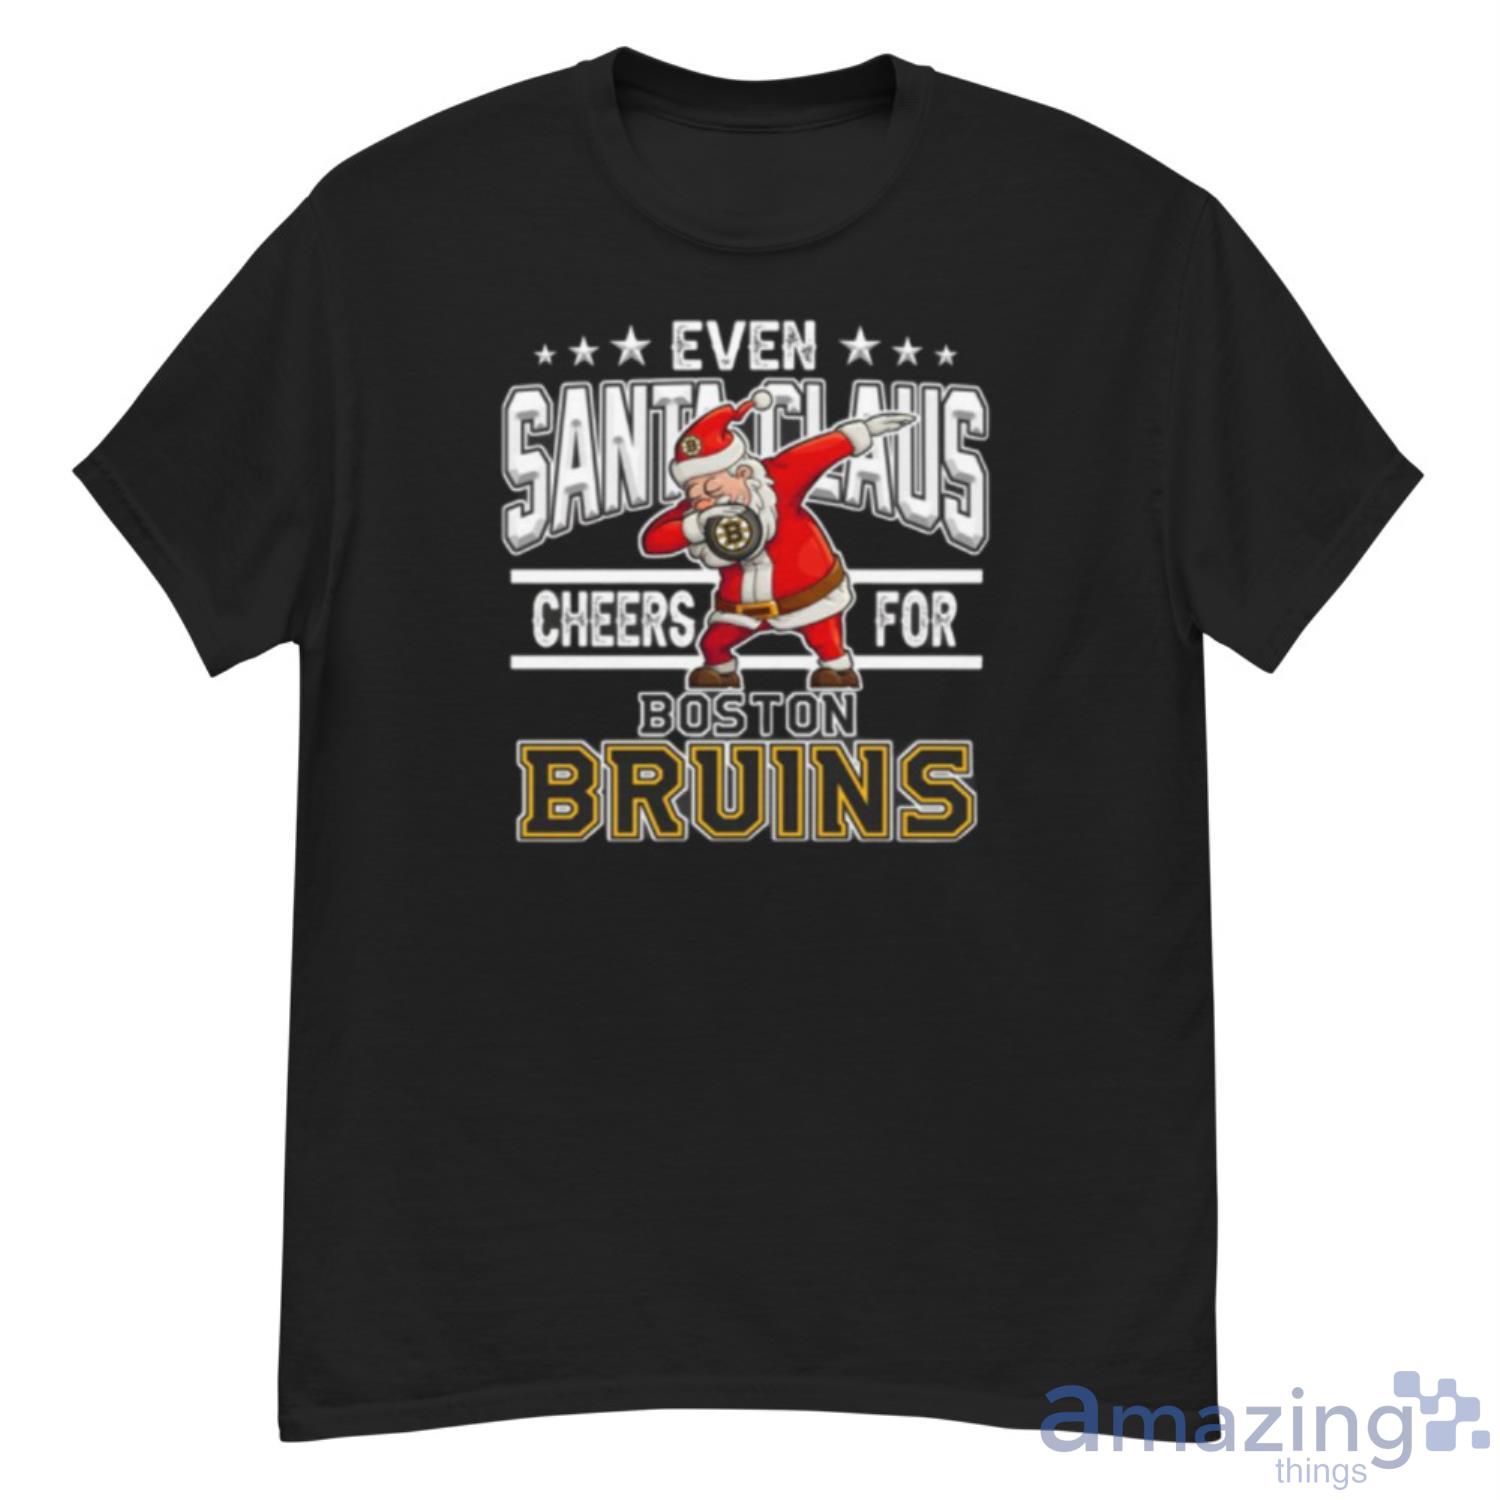 Bruins fans' loyalty is as clear as the shirts on their backs